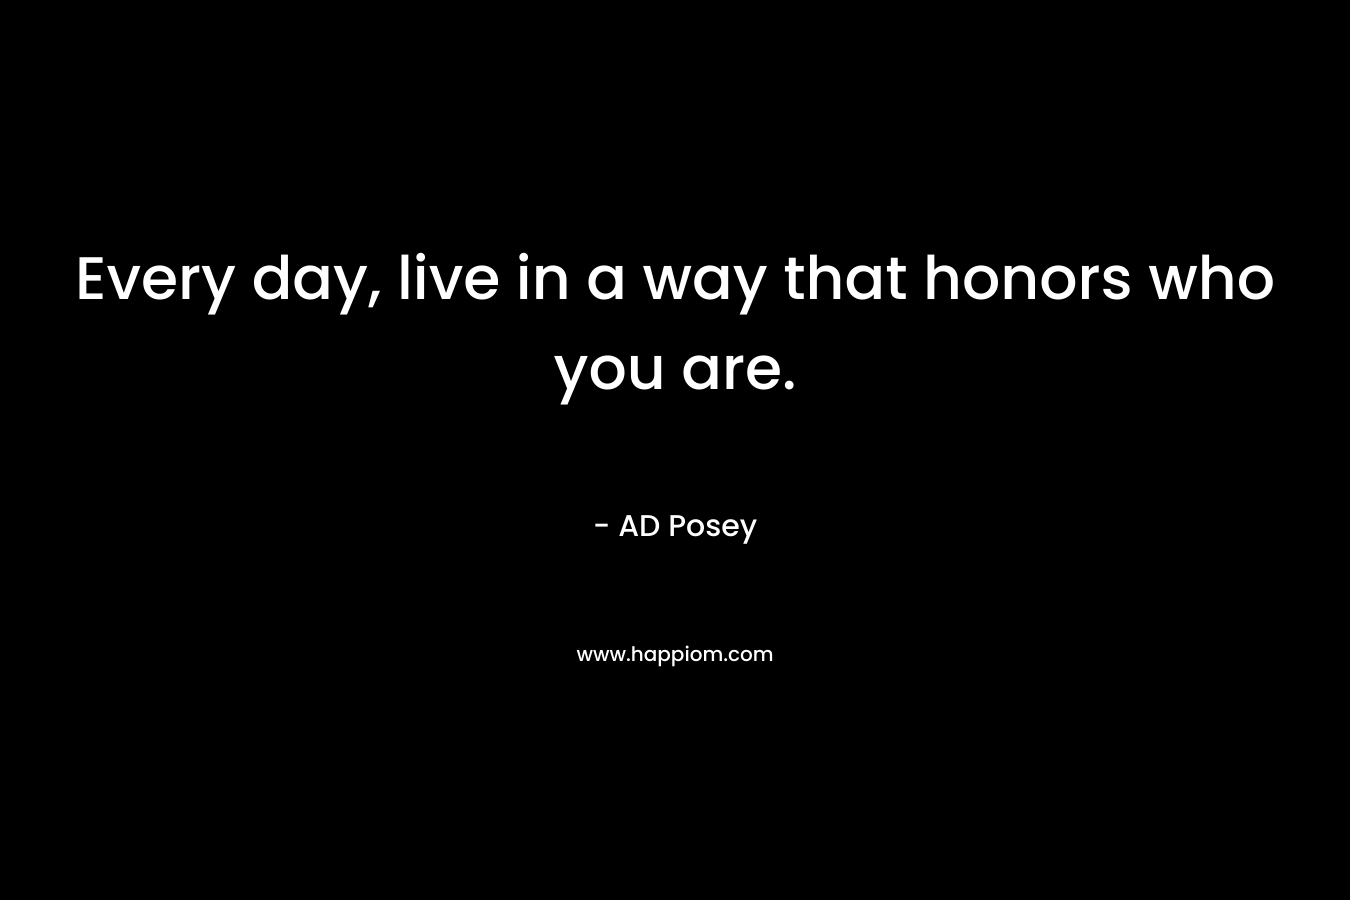 Every day, live in a way that honors who you are.